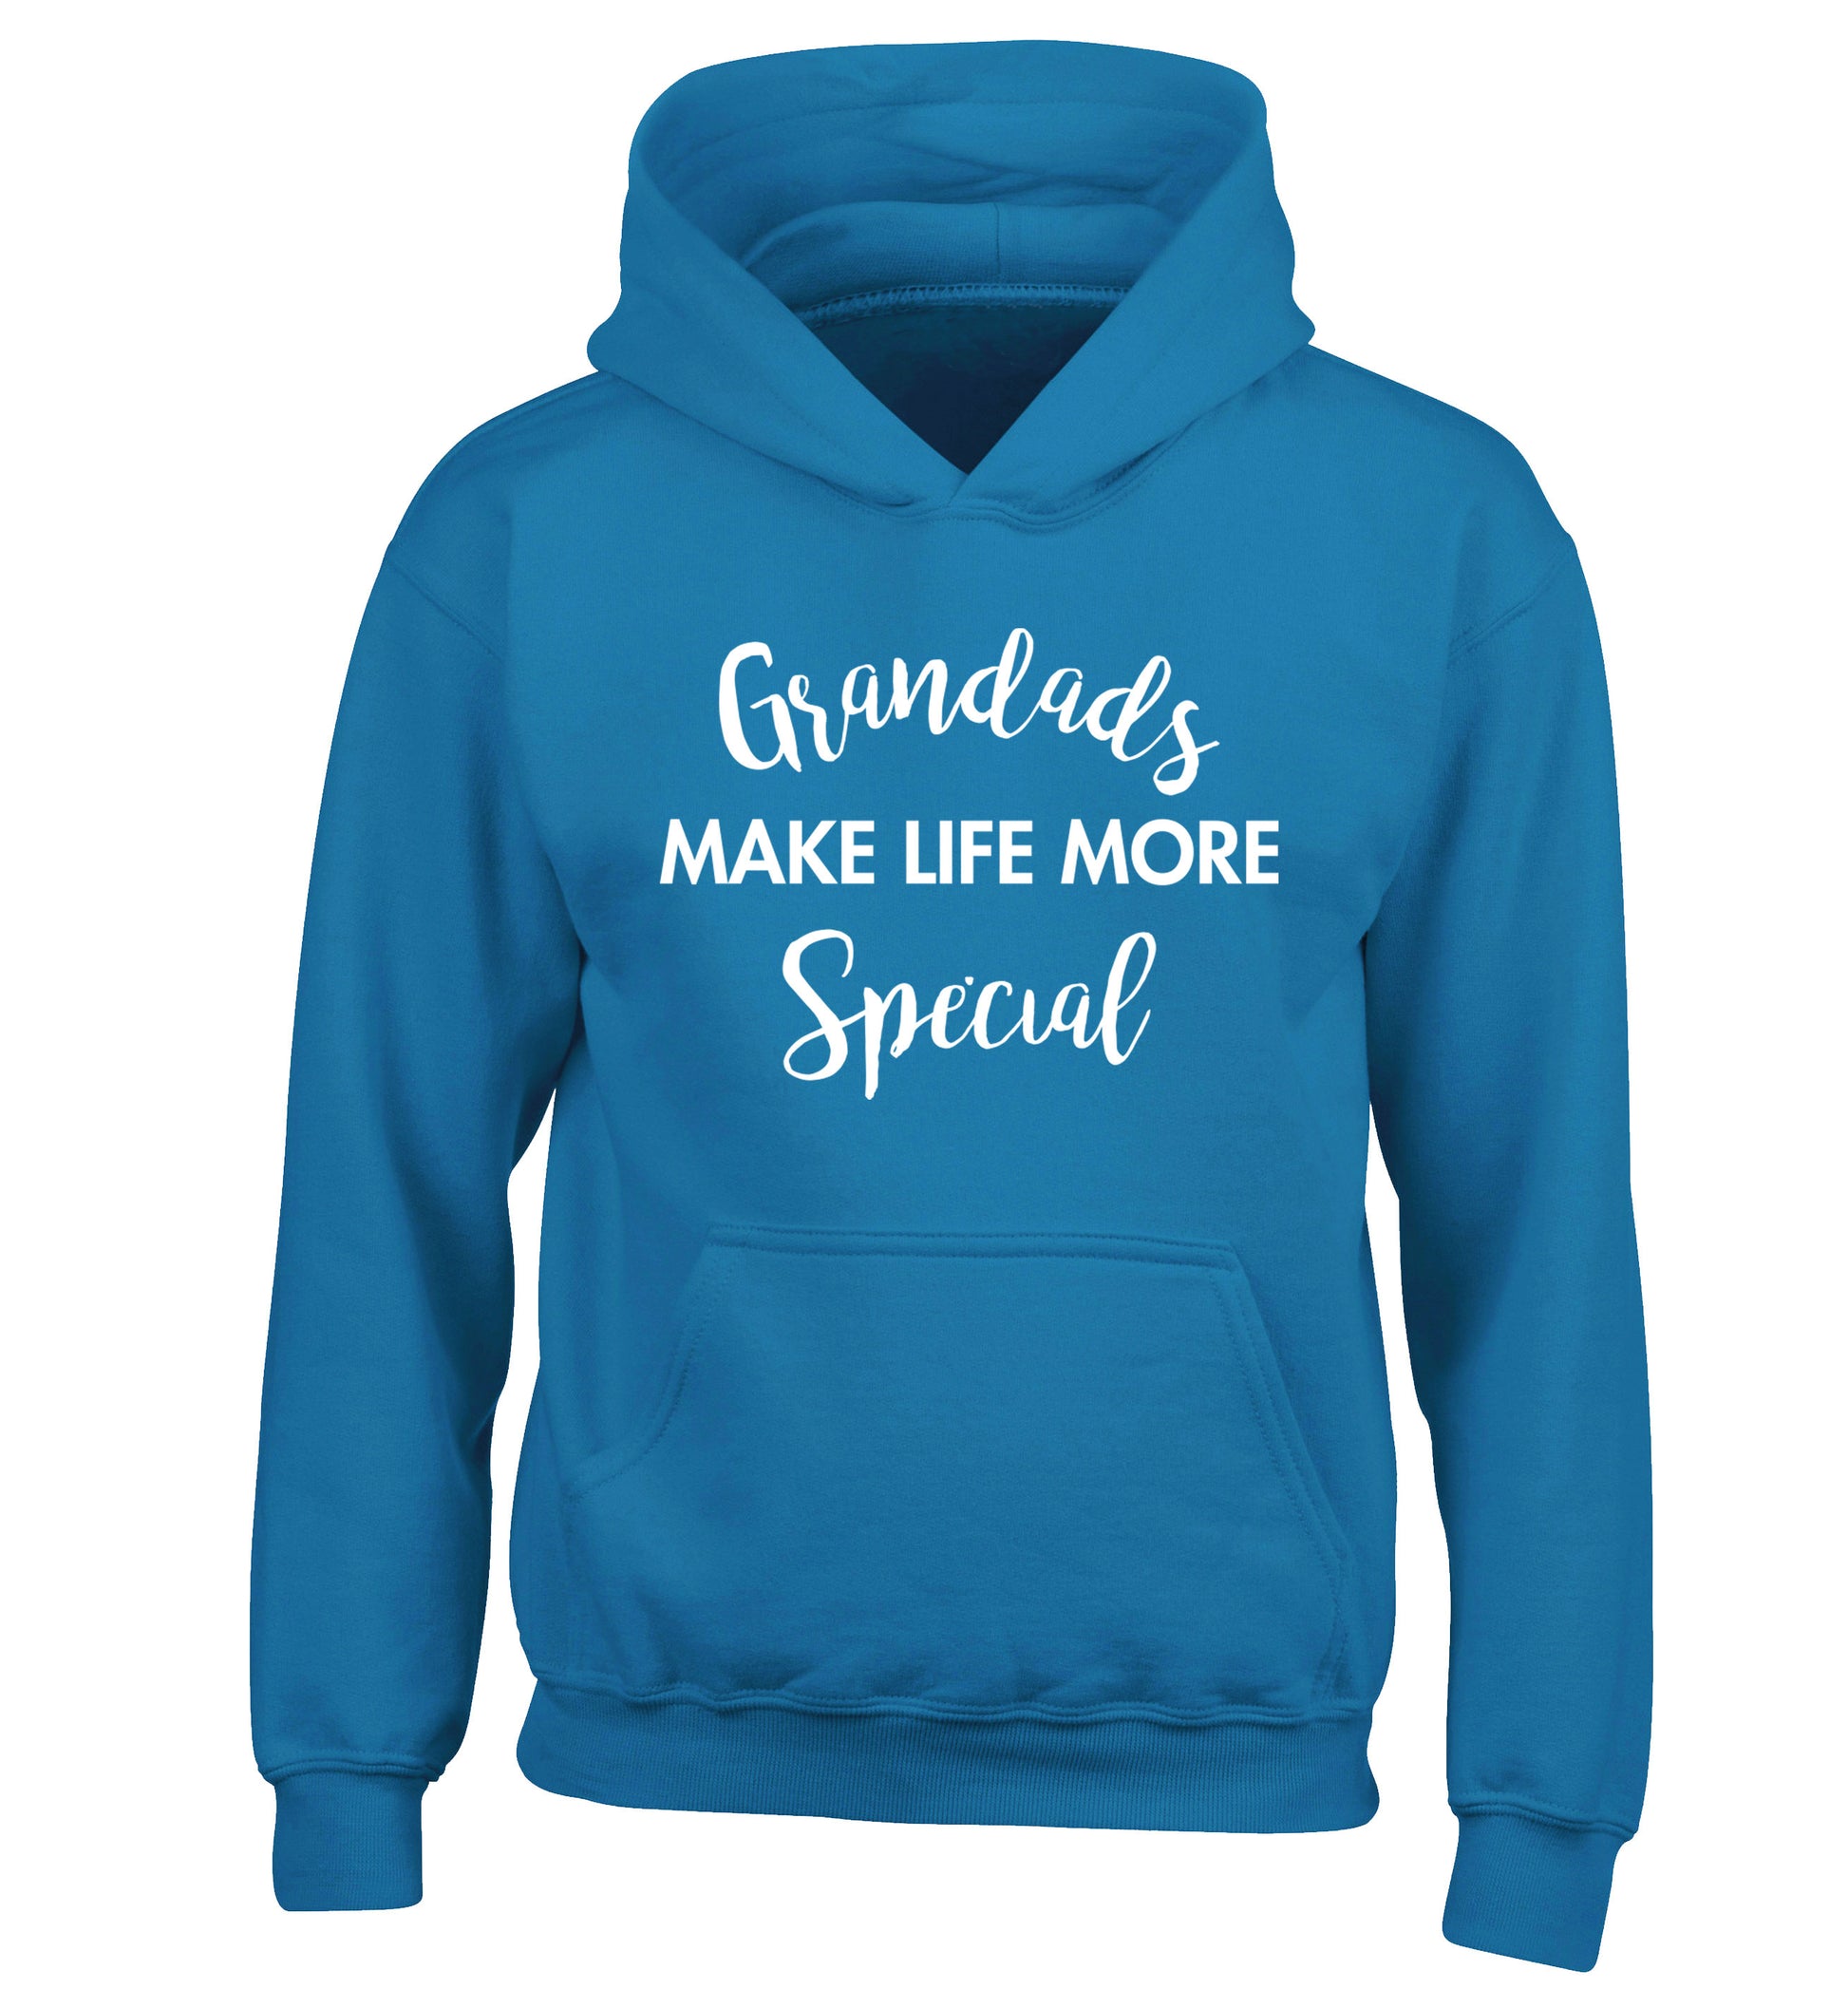 Grandads make life more special children's blue hoodie 12-14 Years